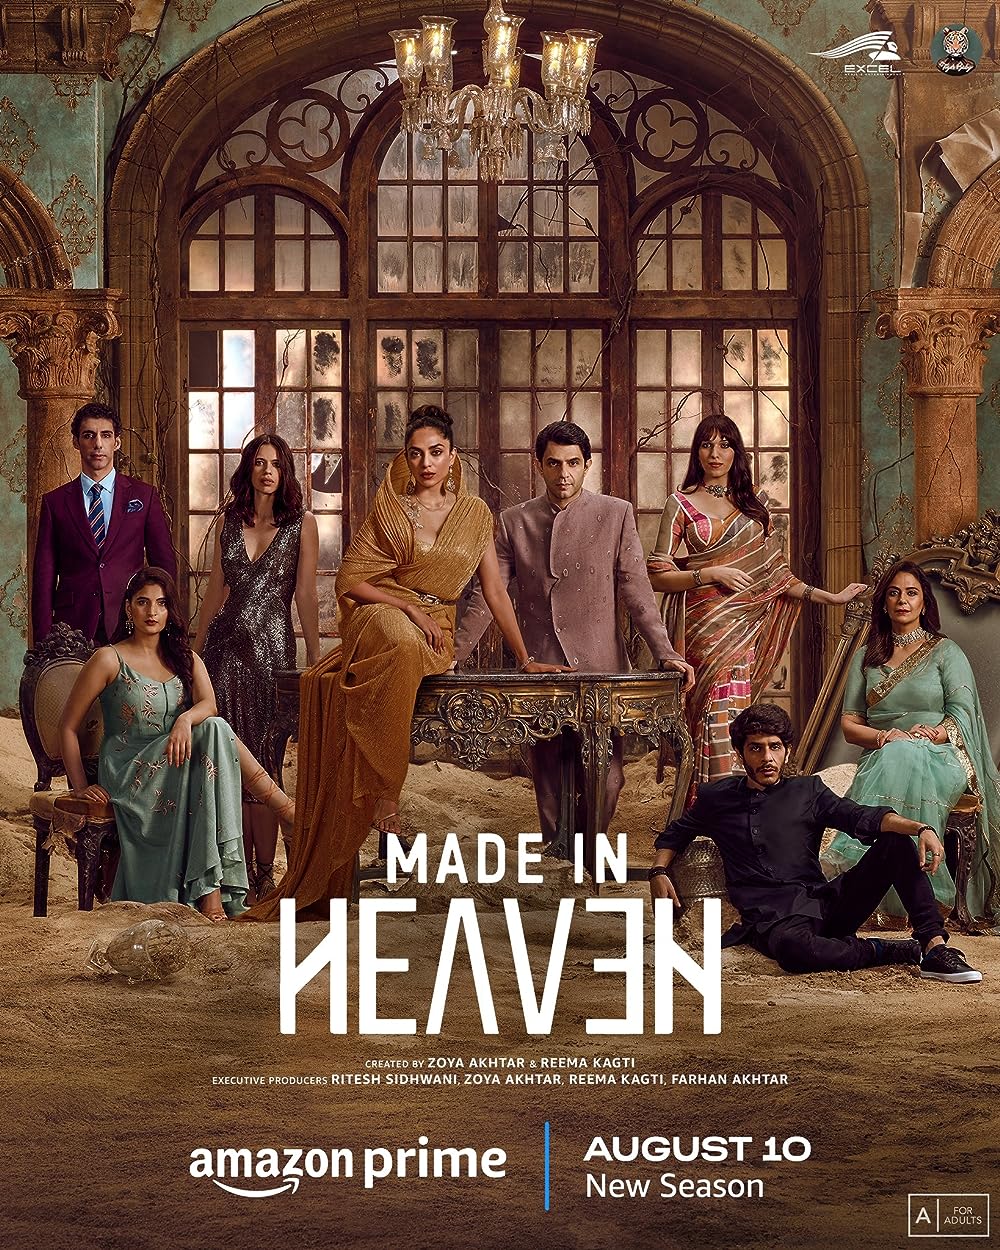 Made in Heaven Season 2 (Prime Video): The highly anticipated second season of Made in Heaven continues to follow the journey of Delhi’s elite wedding planners. The series delves deep into the glamorous and often turbulent world of upper-class Indian weddings.